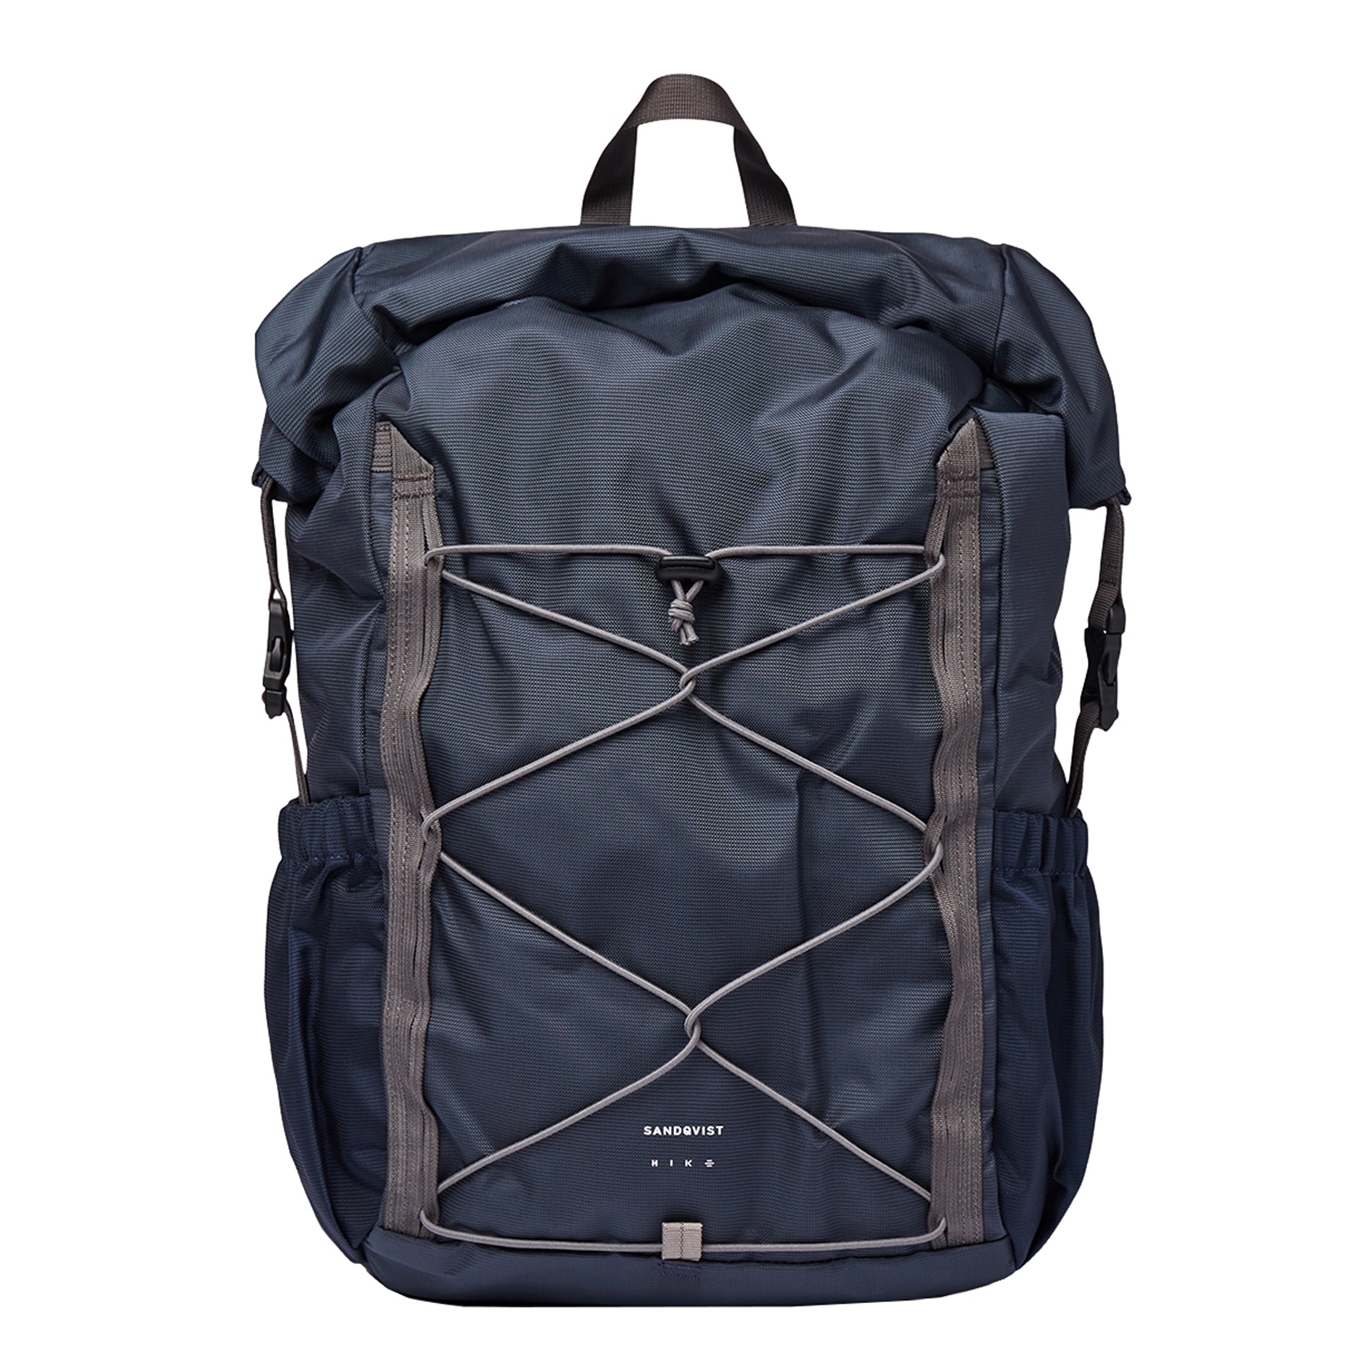 Sandqvist Valley Hike Backpack mixed blue backpack